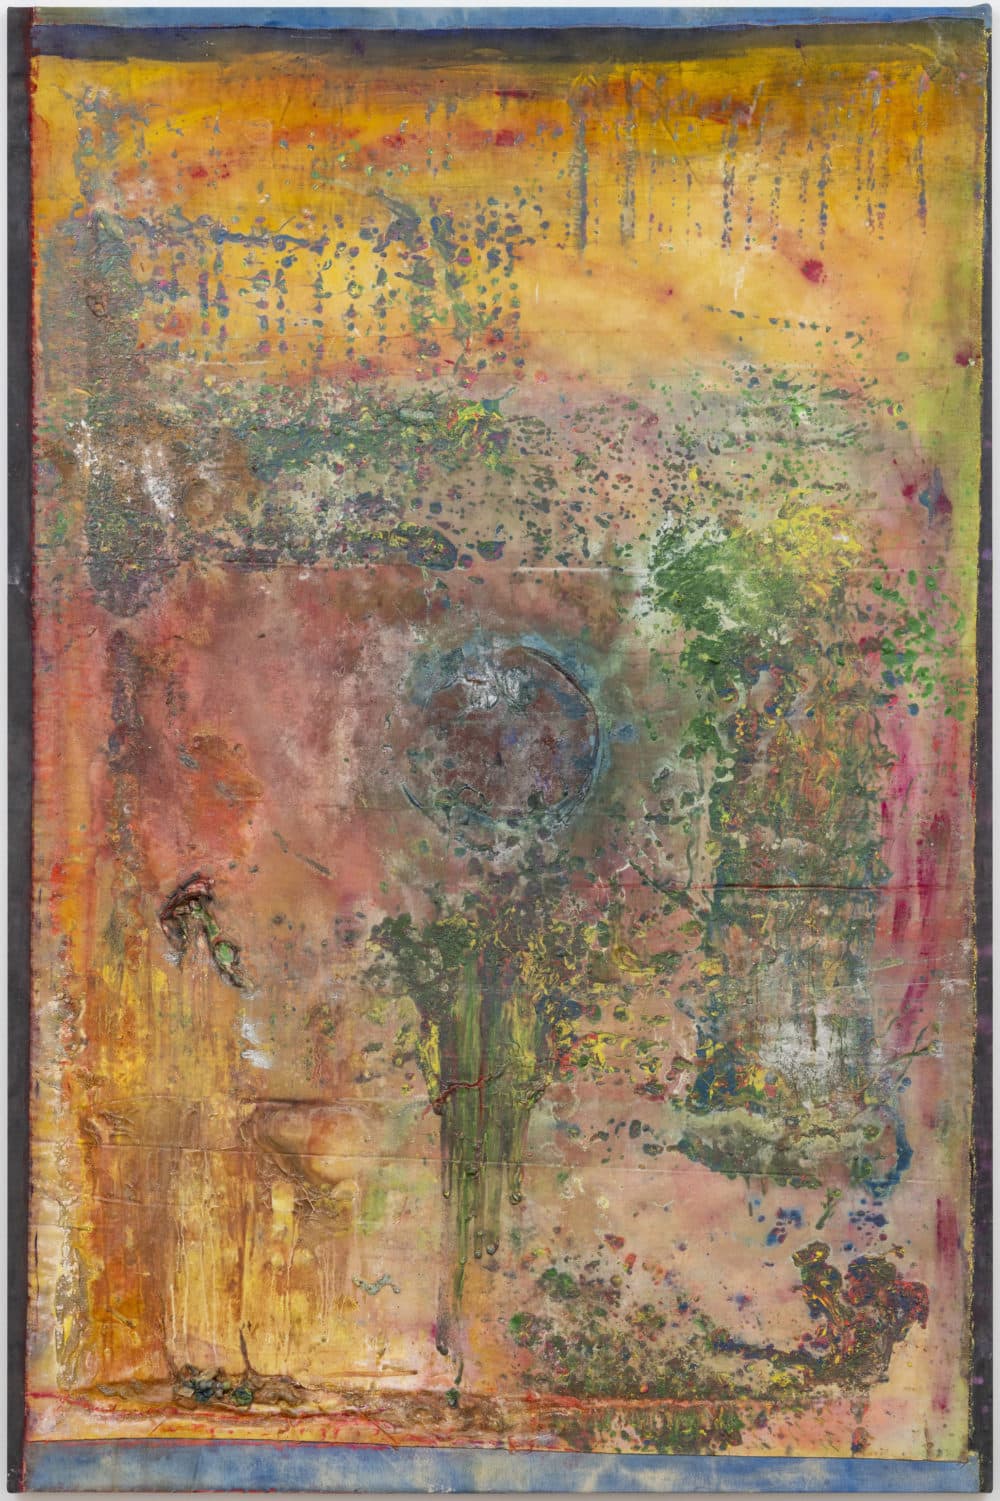 Frank Bowling, &quot;Looking West Again,&quot; 2020. (Courtesy the artist and Hauser &amp; Wirth; Damian Griffiths; DACS/Artimage, London &amp; ARS, New York 2022; Museum of Fine Arts, Boston)